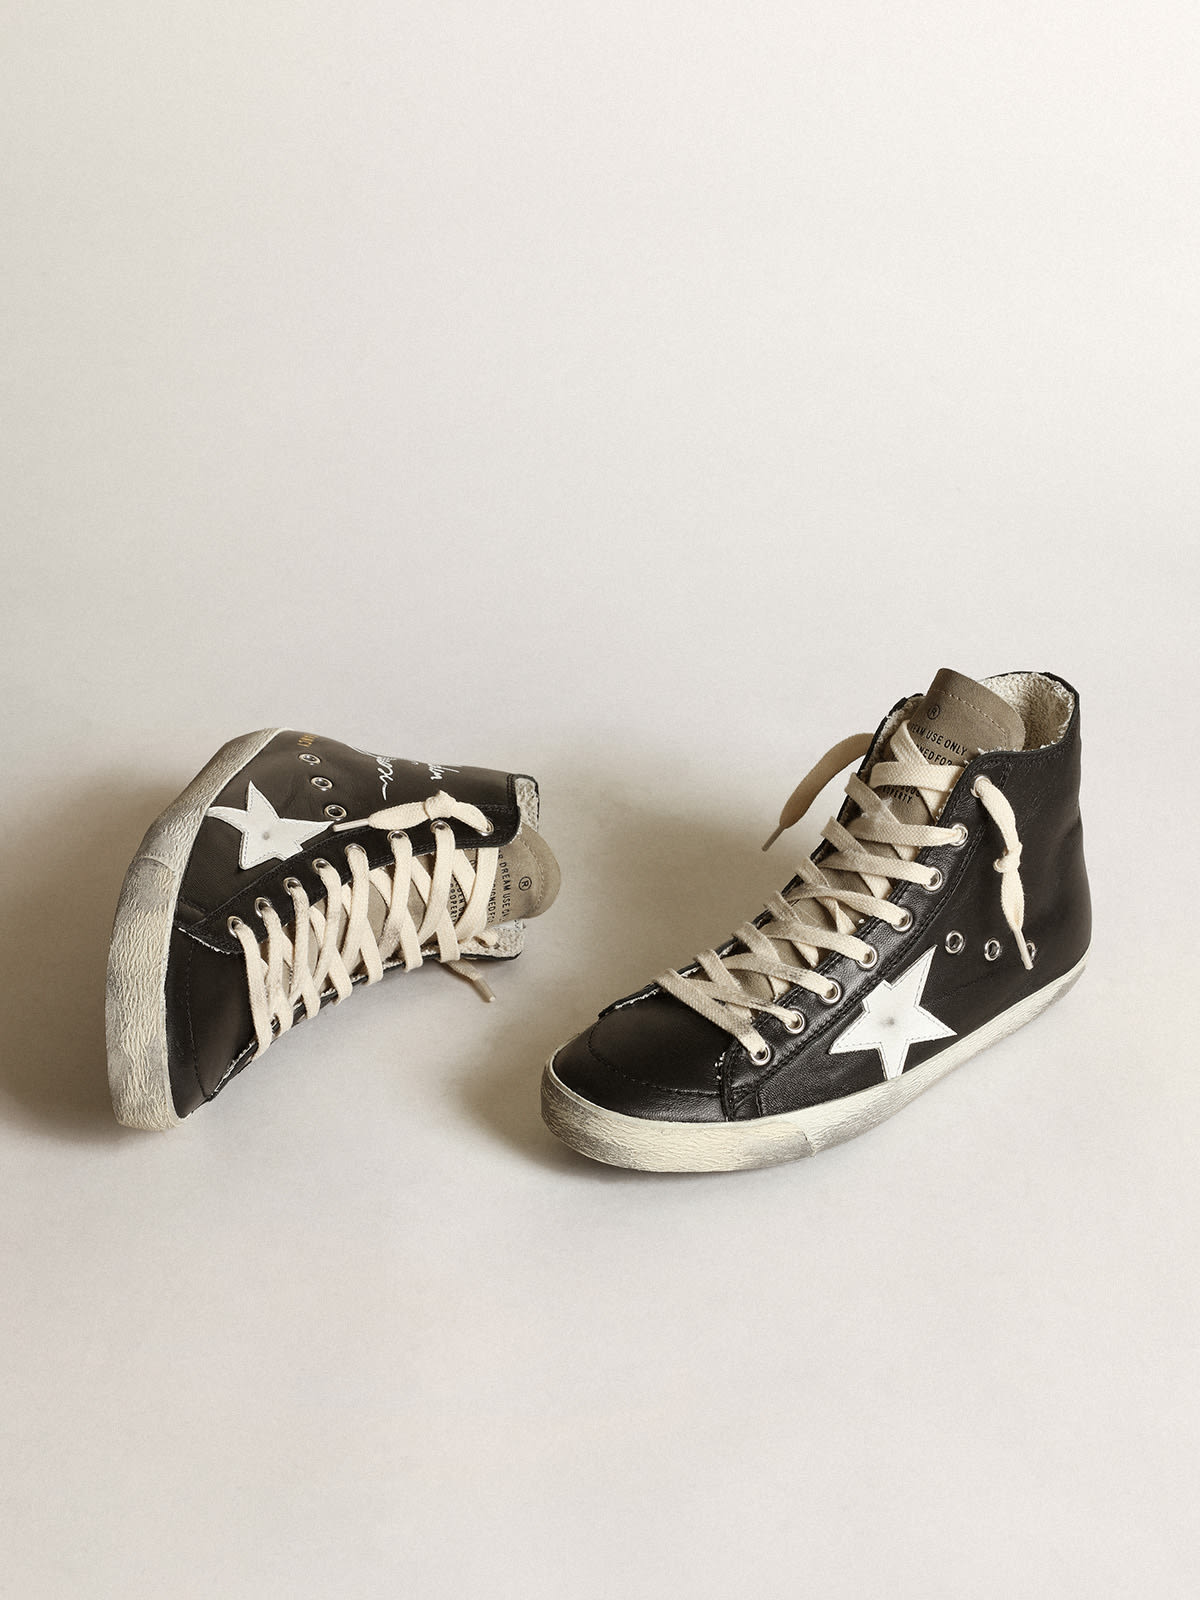 Golden Goose - Women's Francy in black nappa with white leather star in 